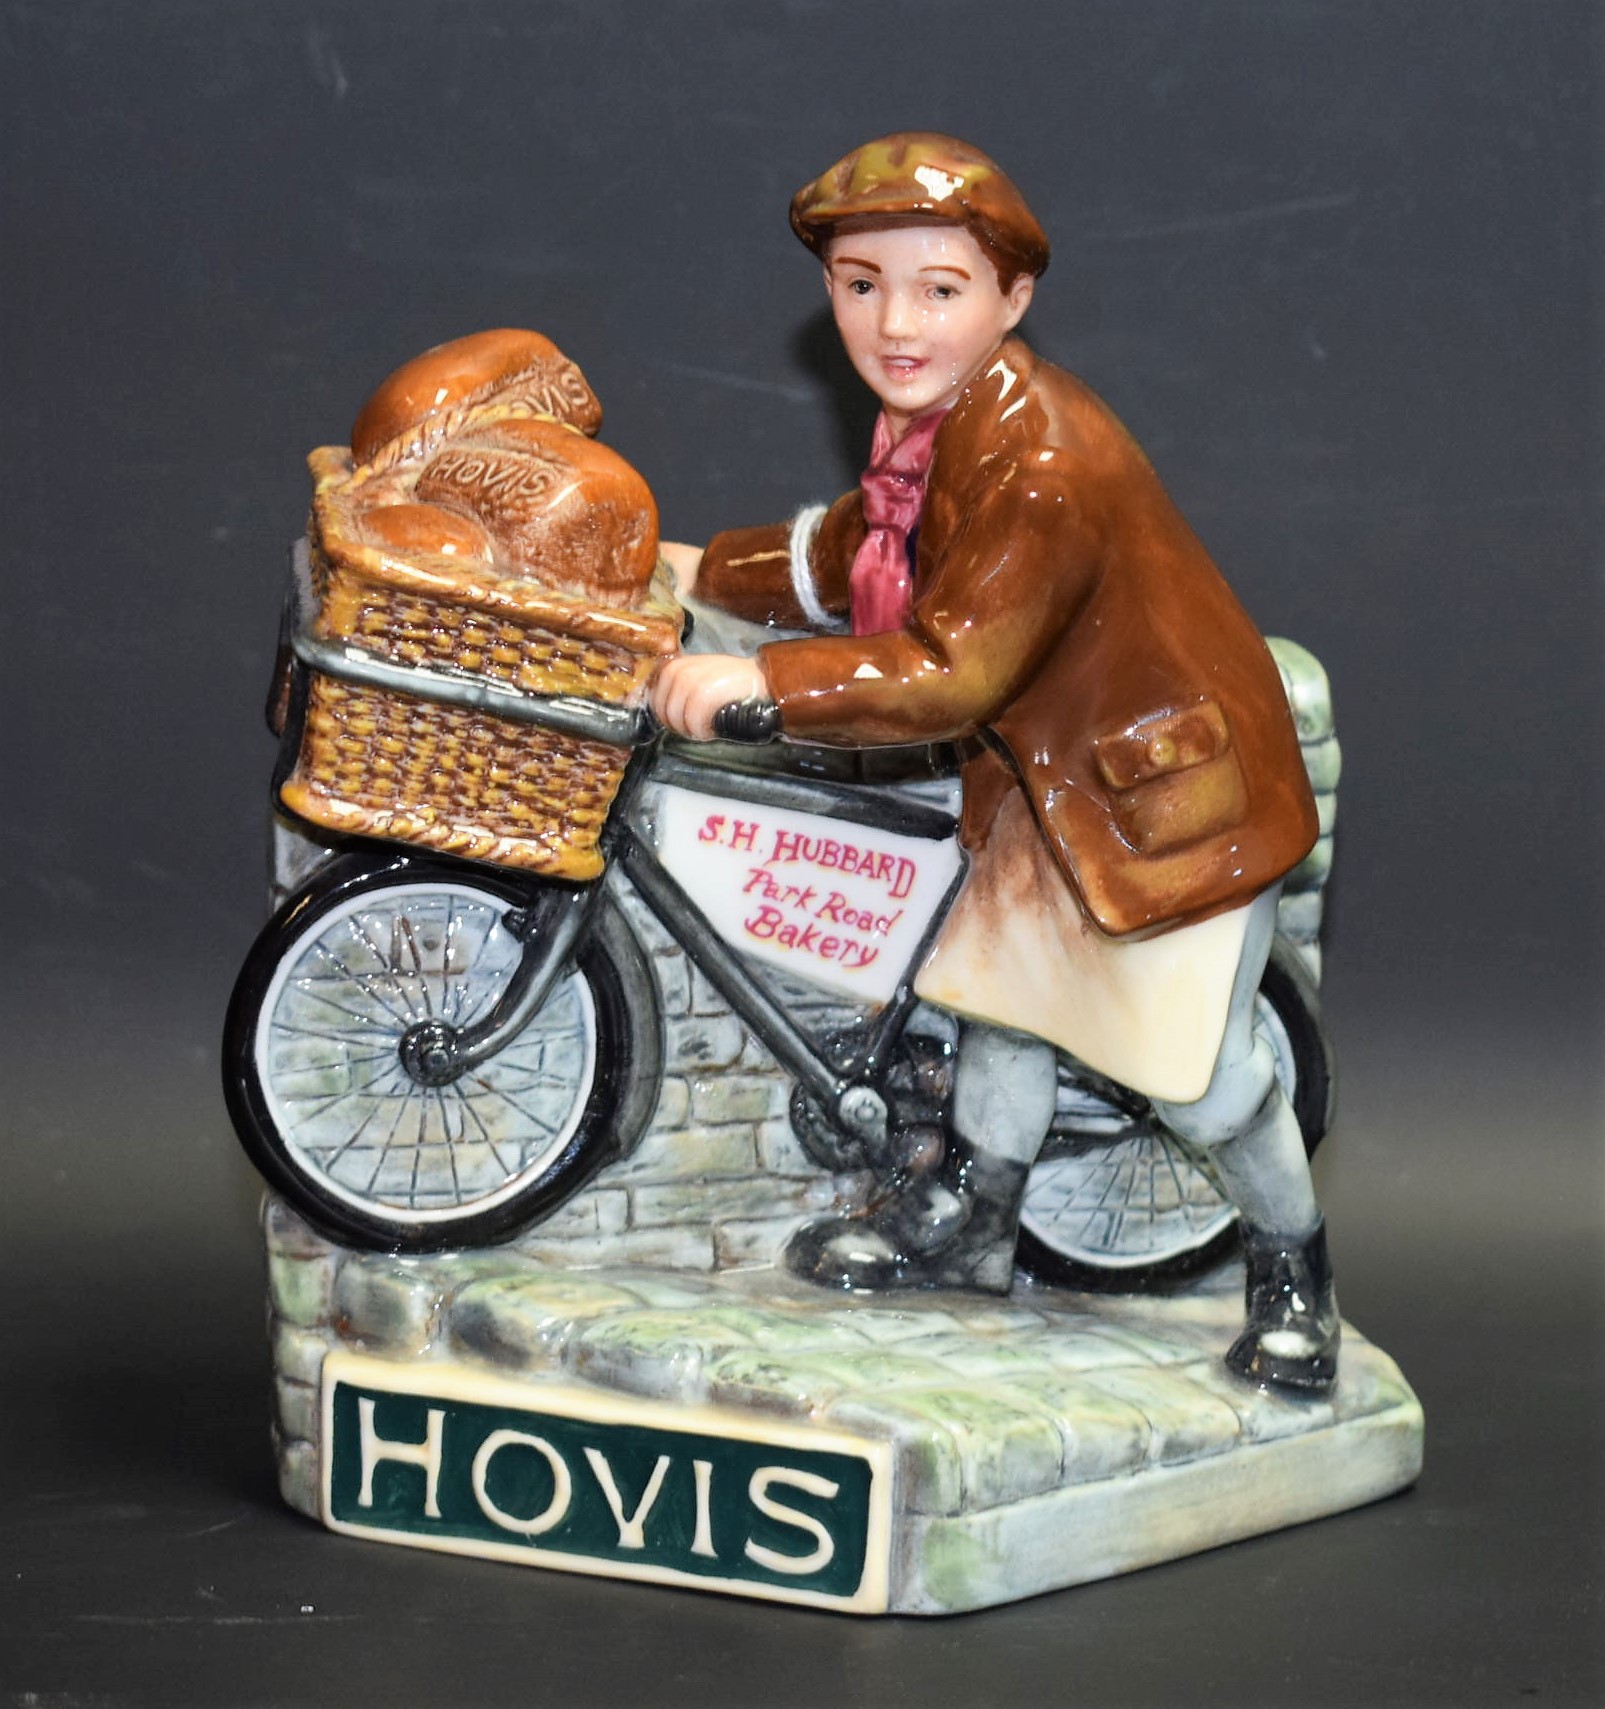 A Royal Doulton ceramic advertising figure, The Hovis Boy, MCL27,